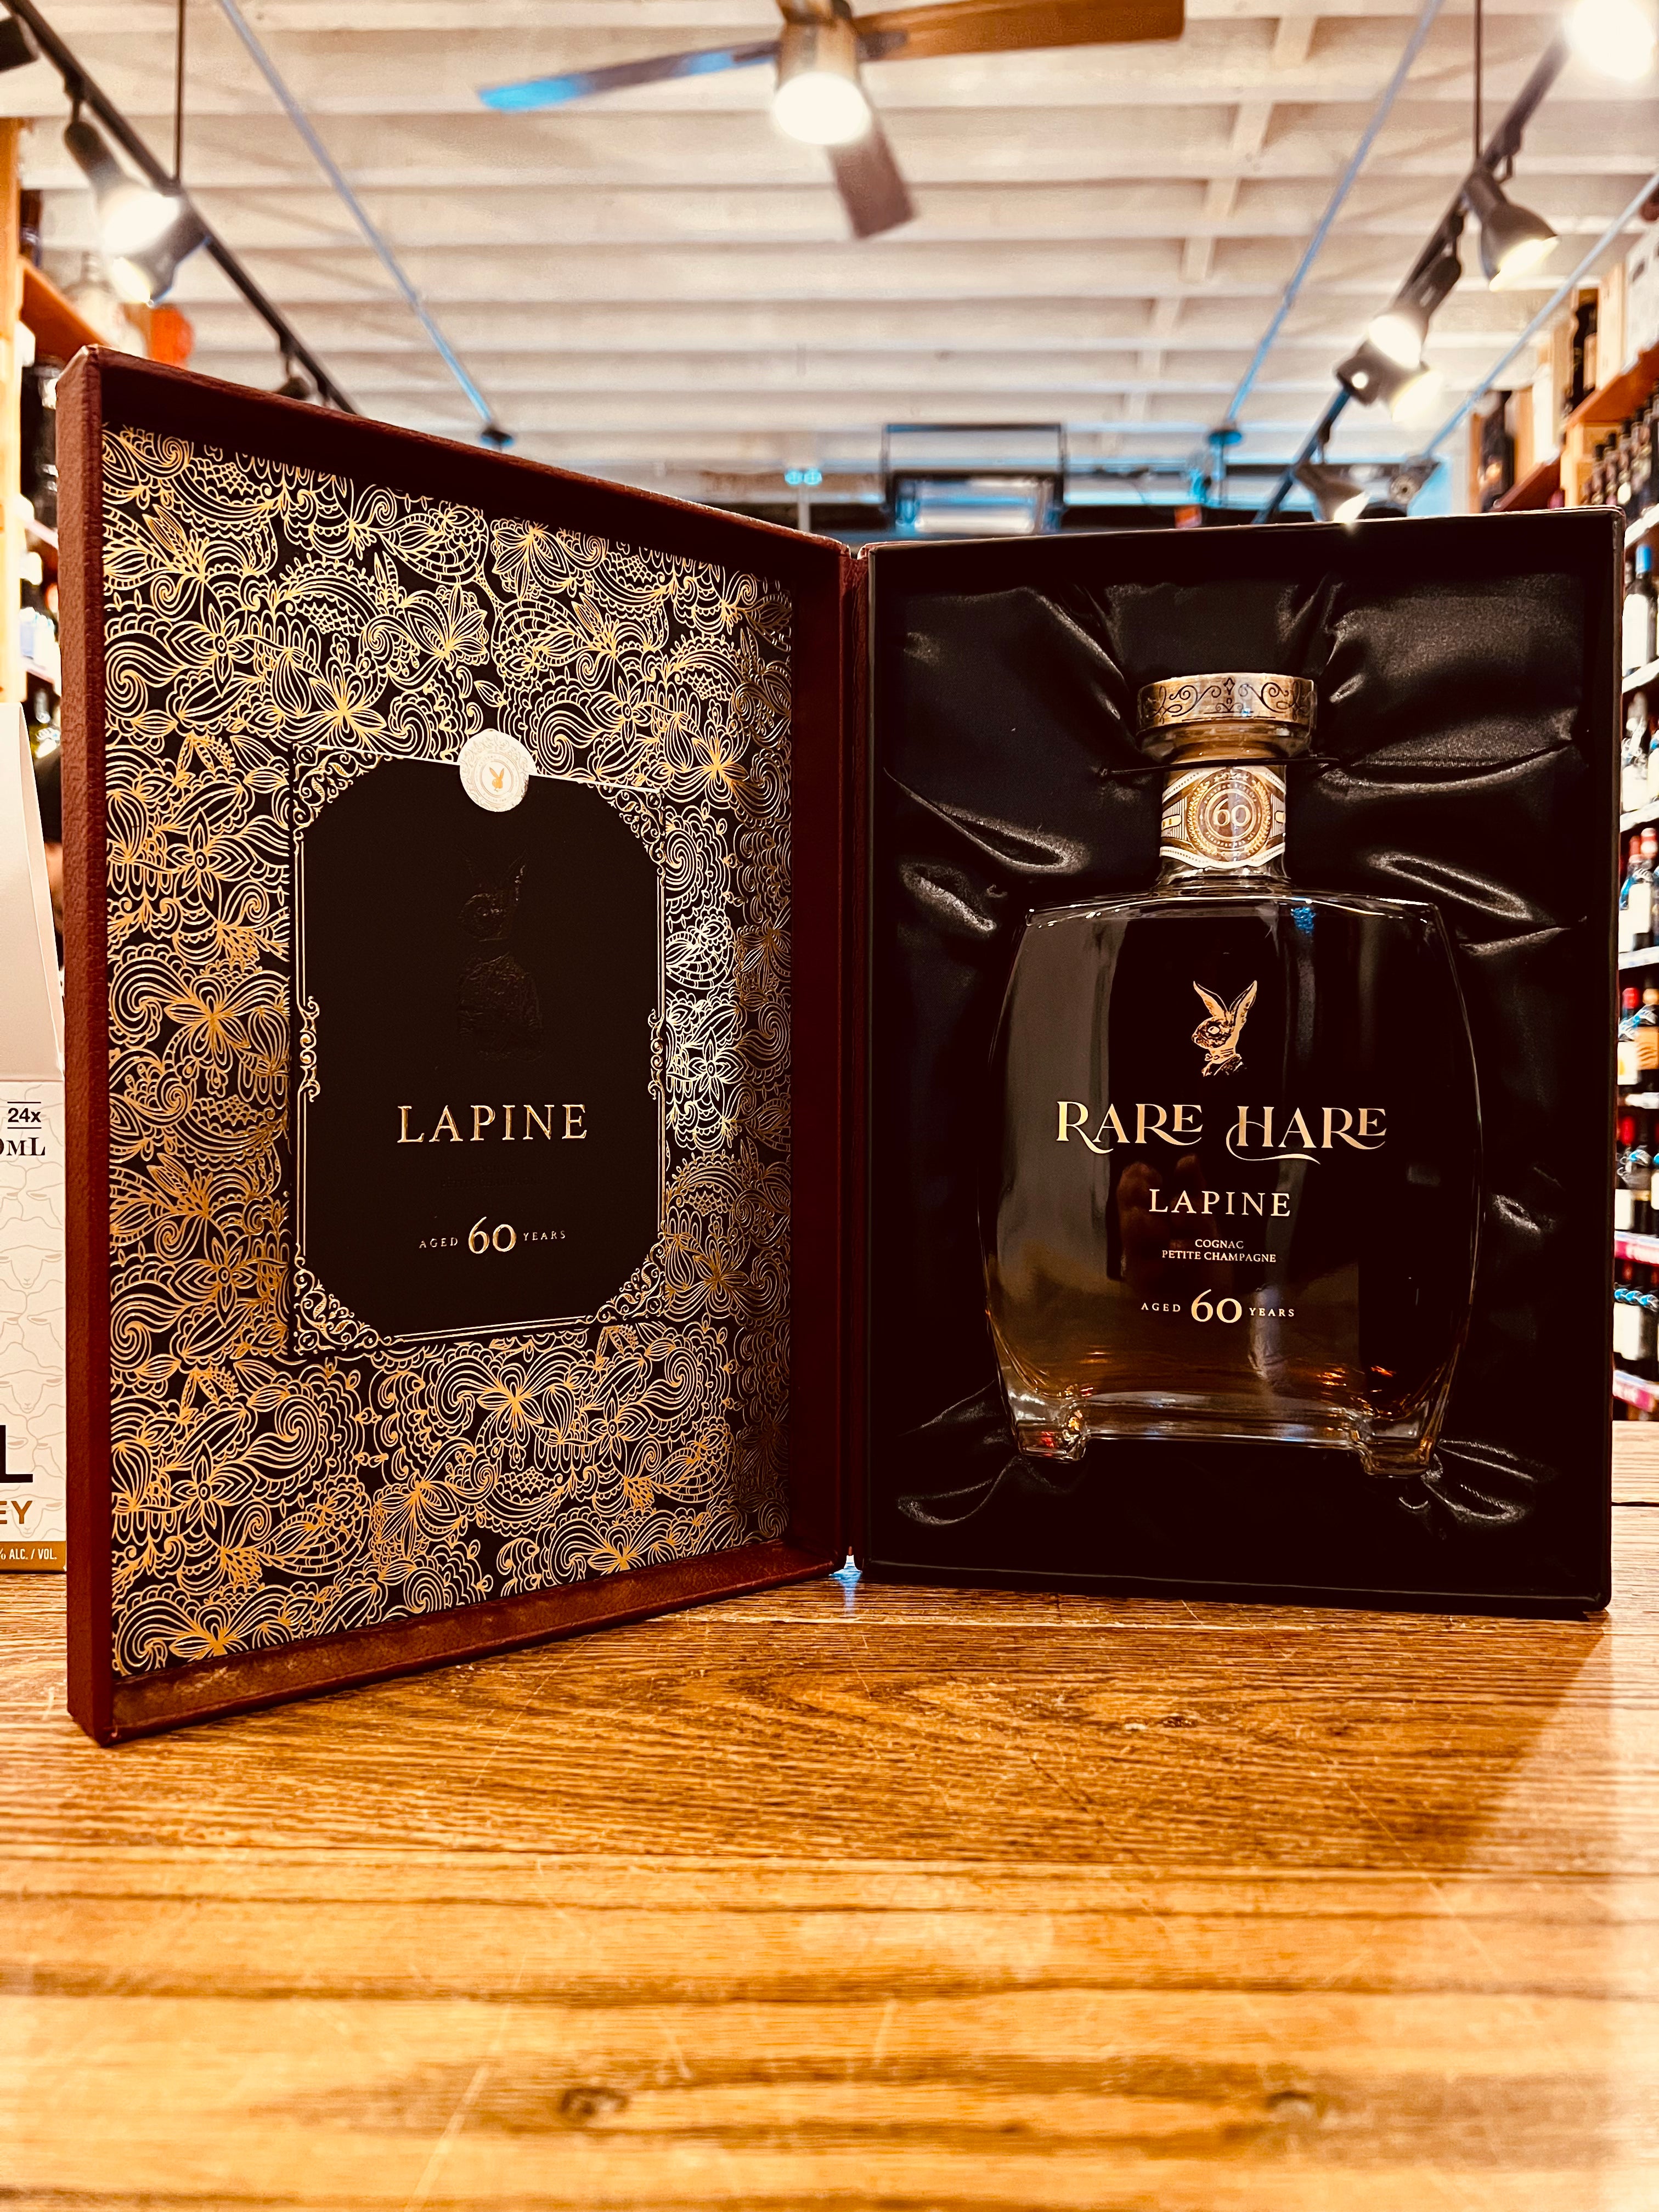 Rare Hare Cognac Lapine Aged 60 Years 750mL an open box one side lined in a golden intricate design the other sided being lines in black velvet holding a short squared clear glass bottle with golden lettering and a golden top 